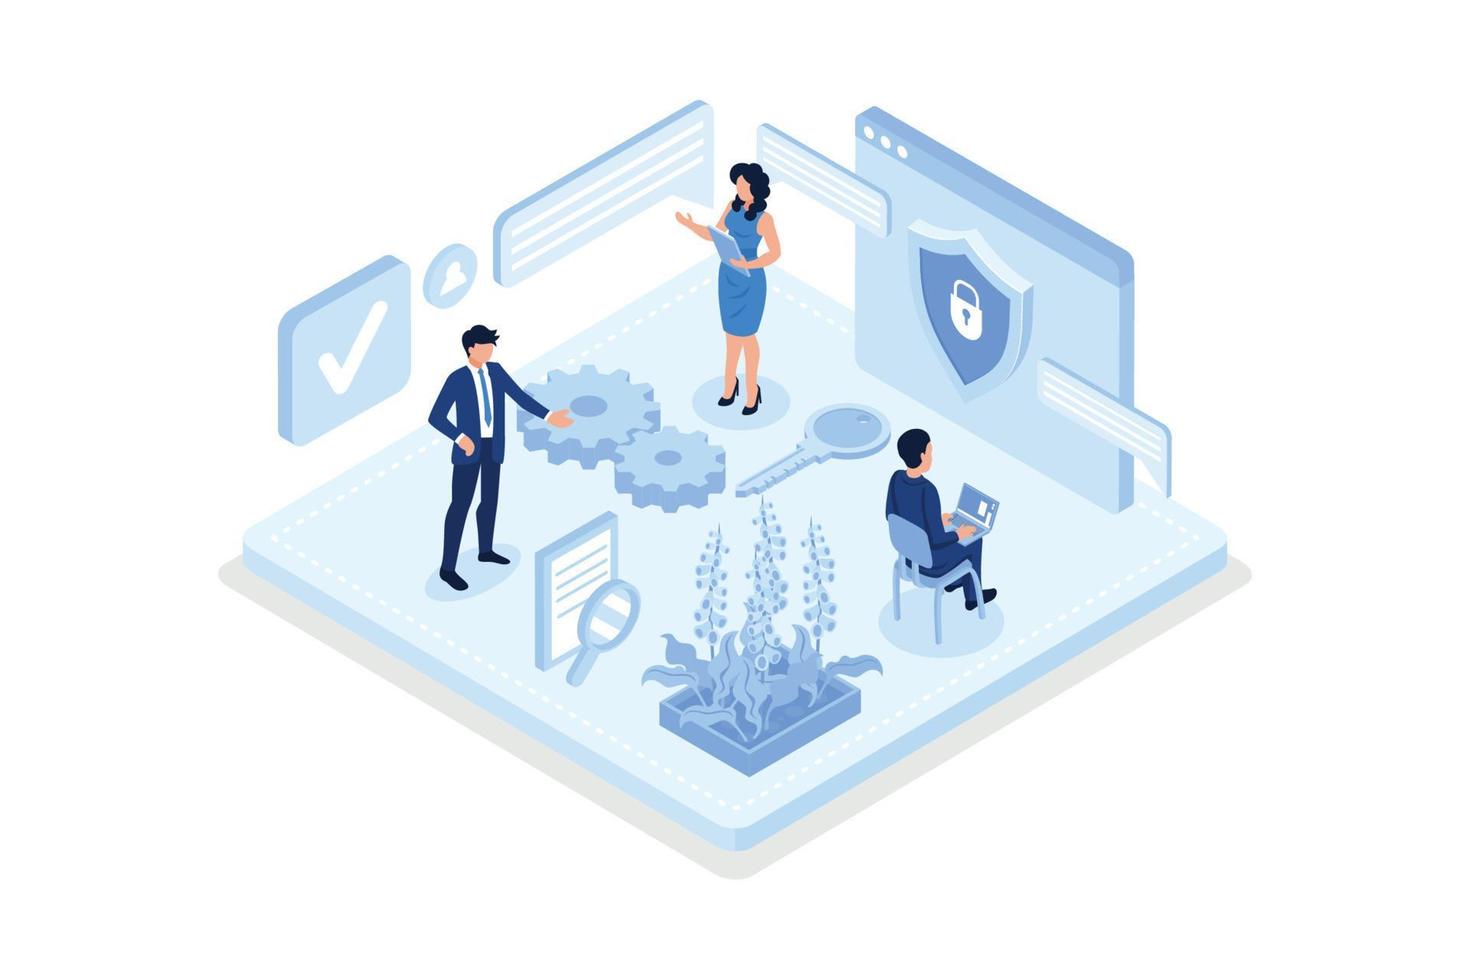 Laptop with Firewall Protection Shield on Screen. Personal Information and Data Safety. Password Security. Cyber Security and Data Protection Concept, isometric vector modern illustration